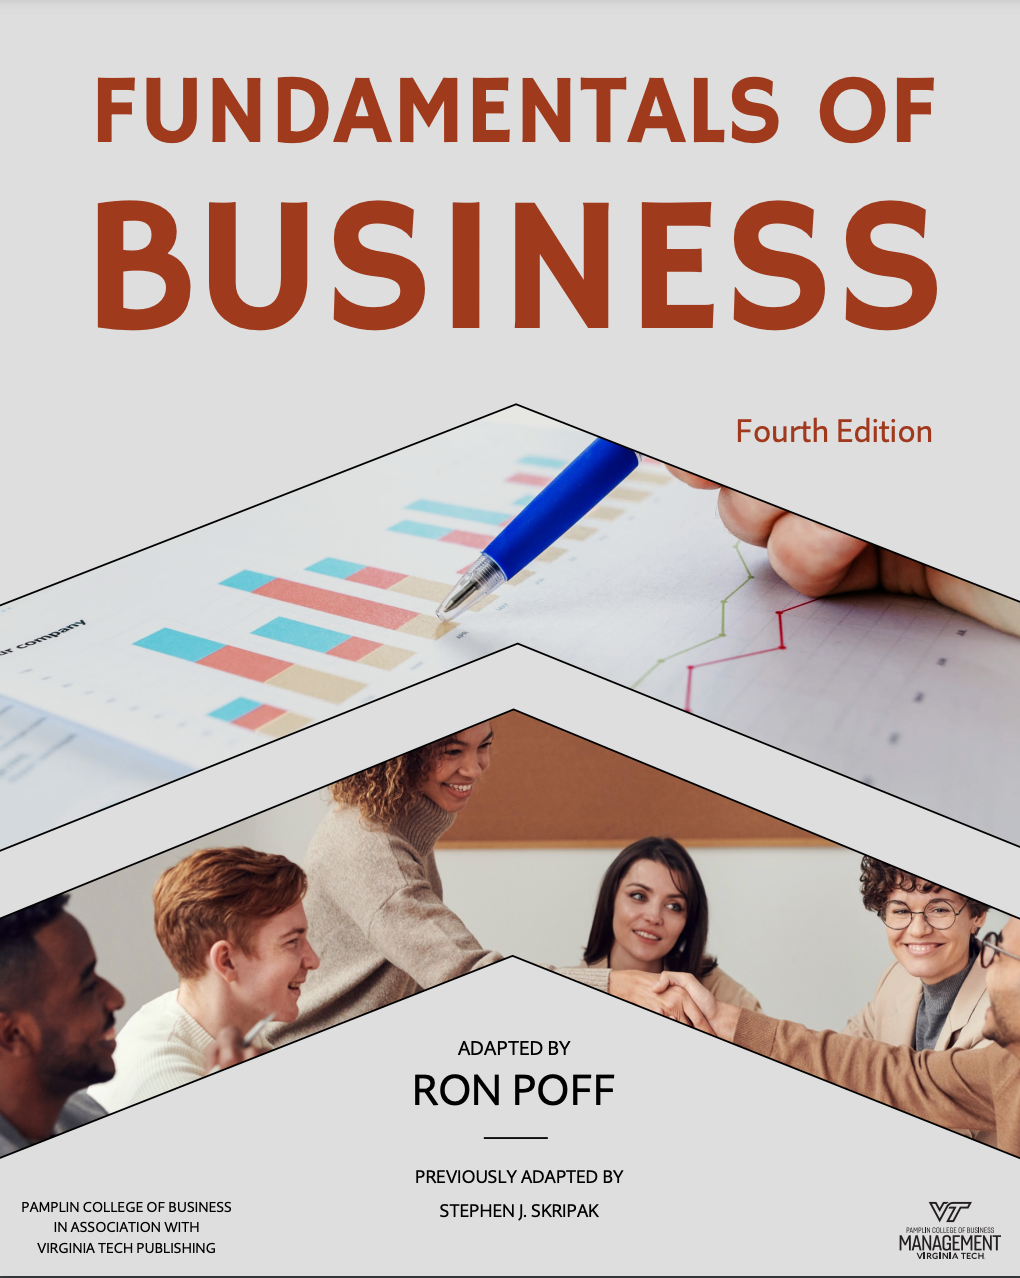 Business　4th　Fundamentals　Textbook　Open　of　Edition　Library